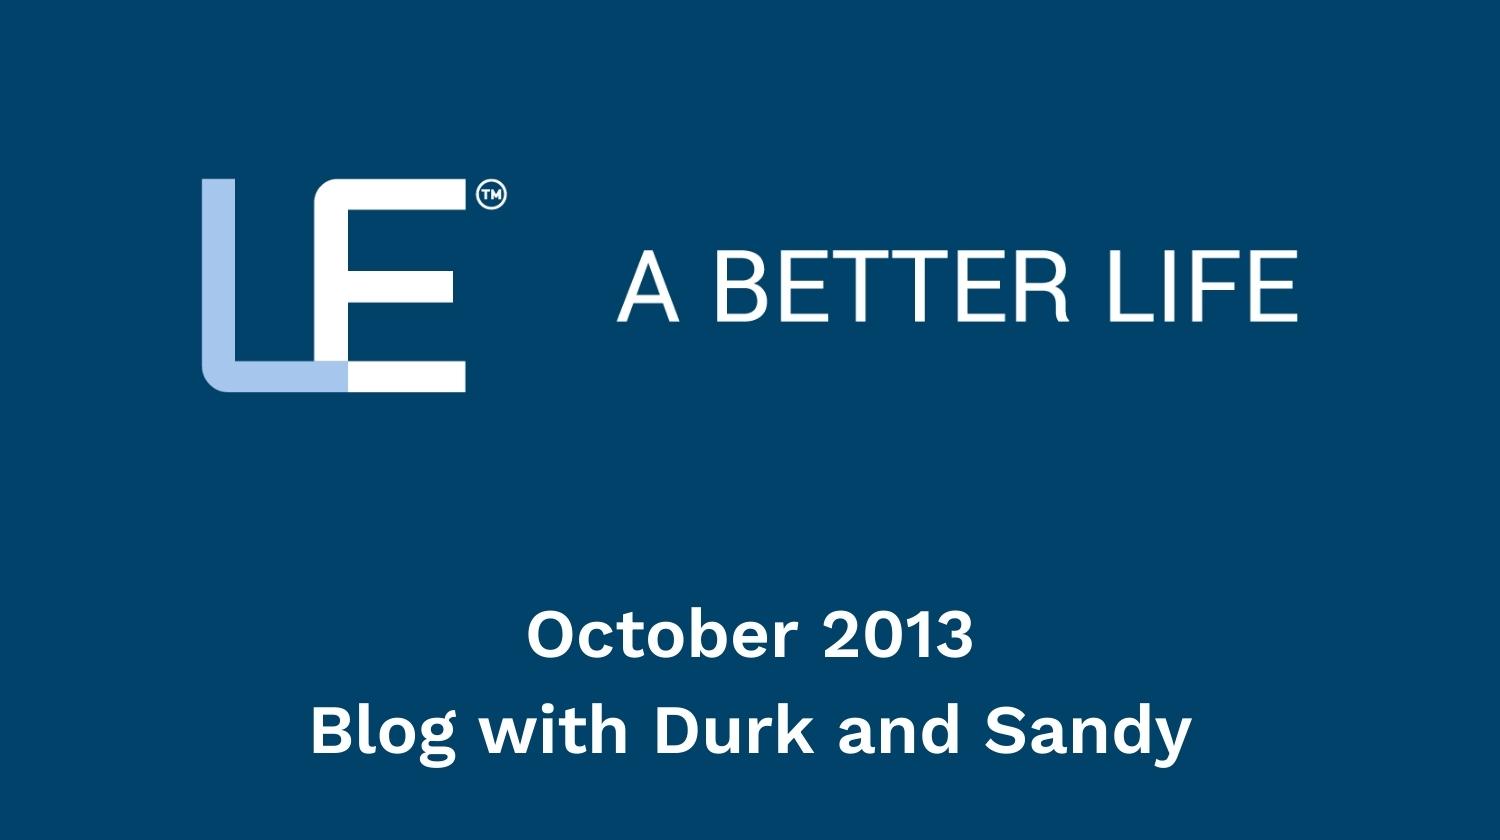 October 2013 Blog with Durk and Sandy